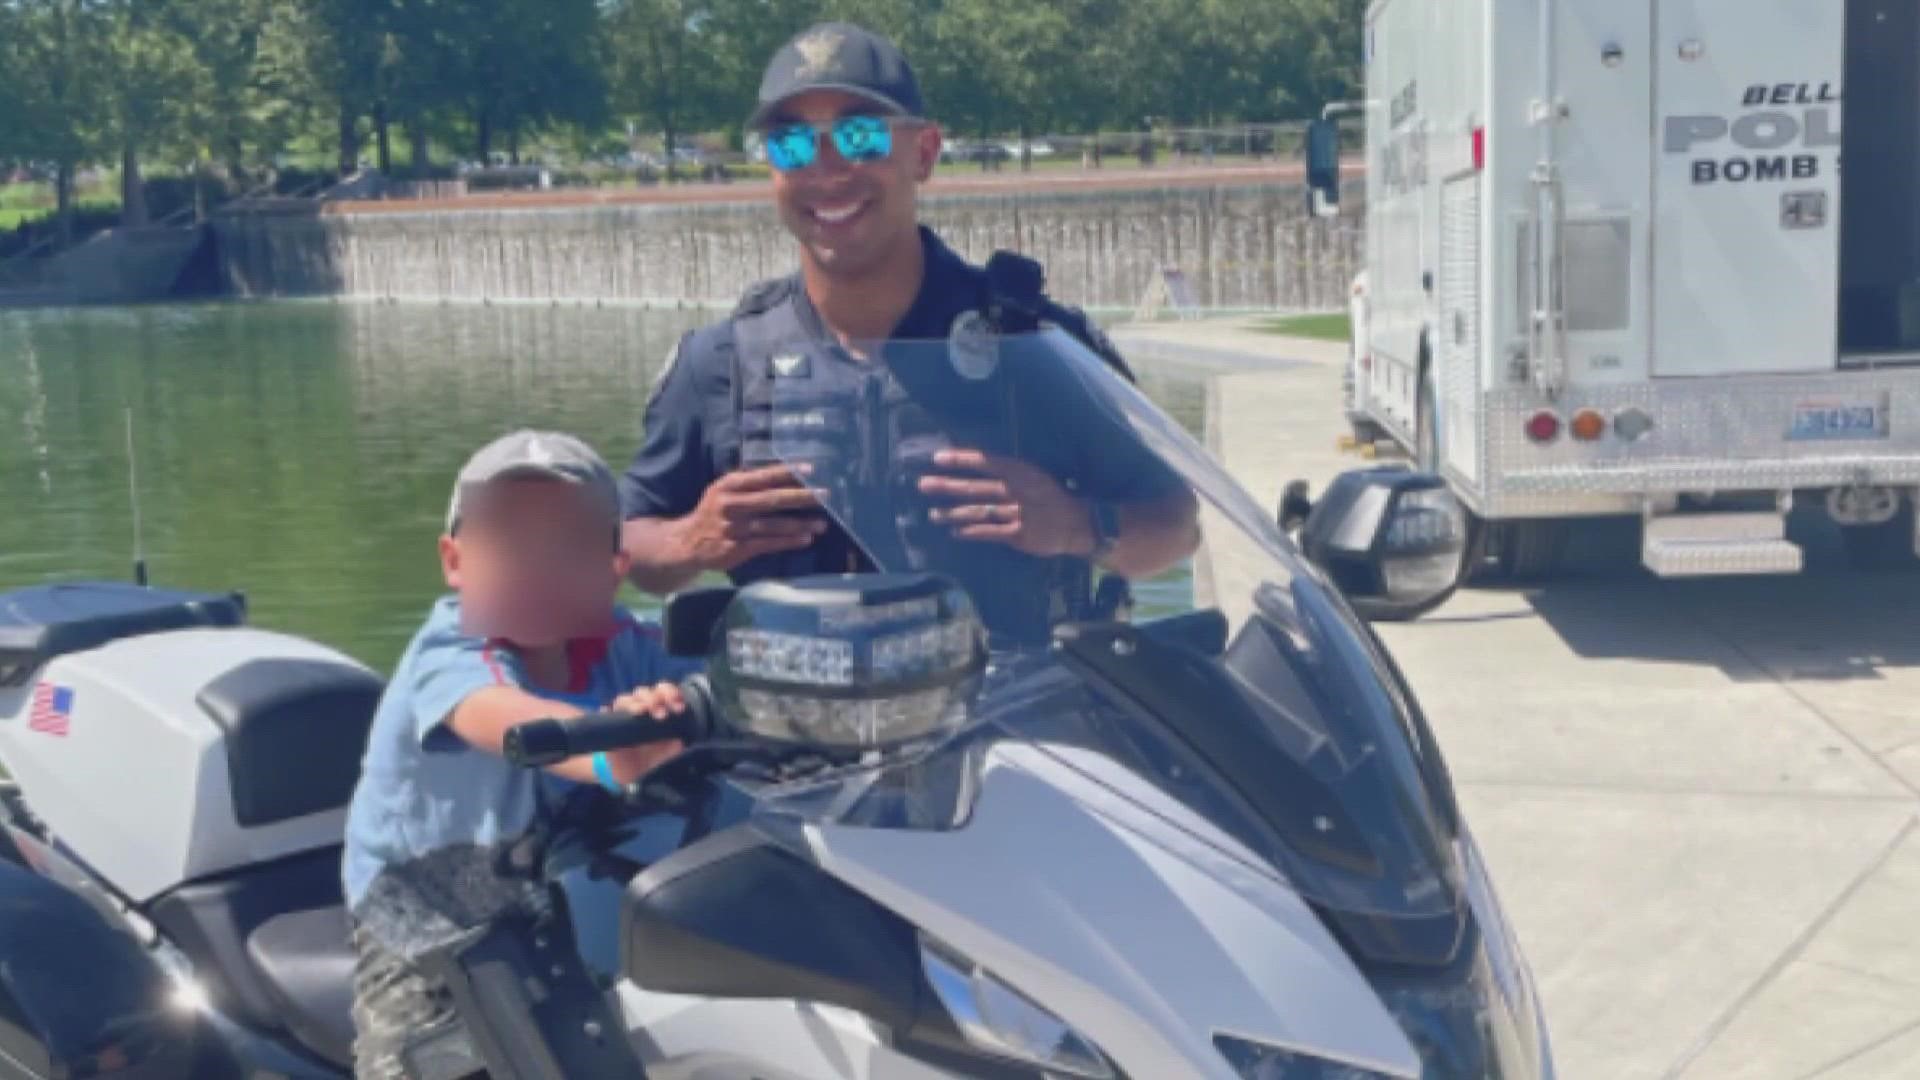 Officer Jordan Jackson was hit while riding his police motorcycle along Bellevue Way.